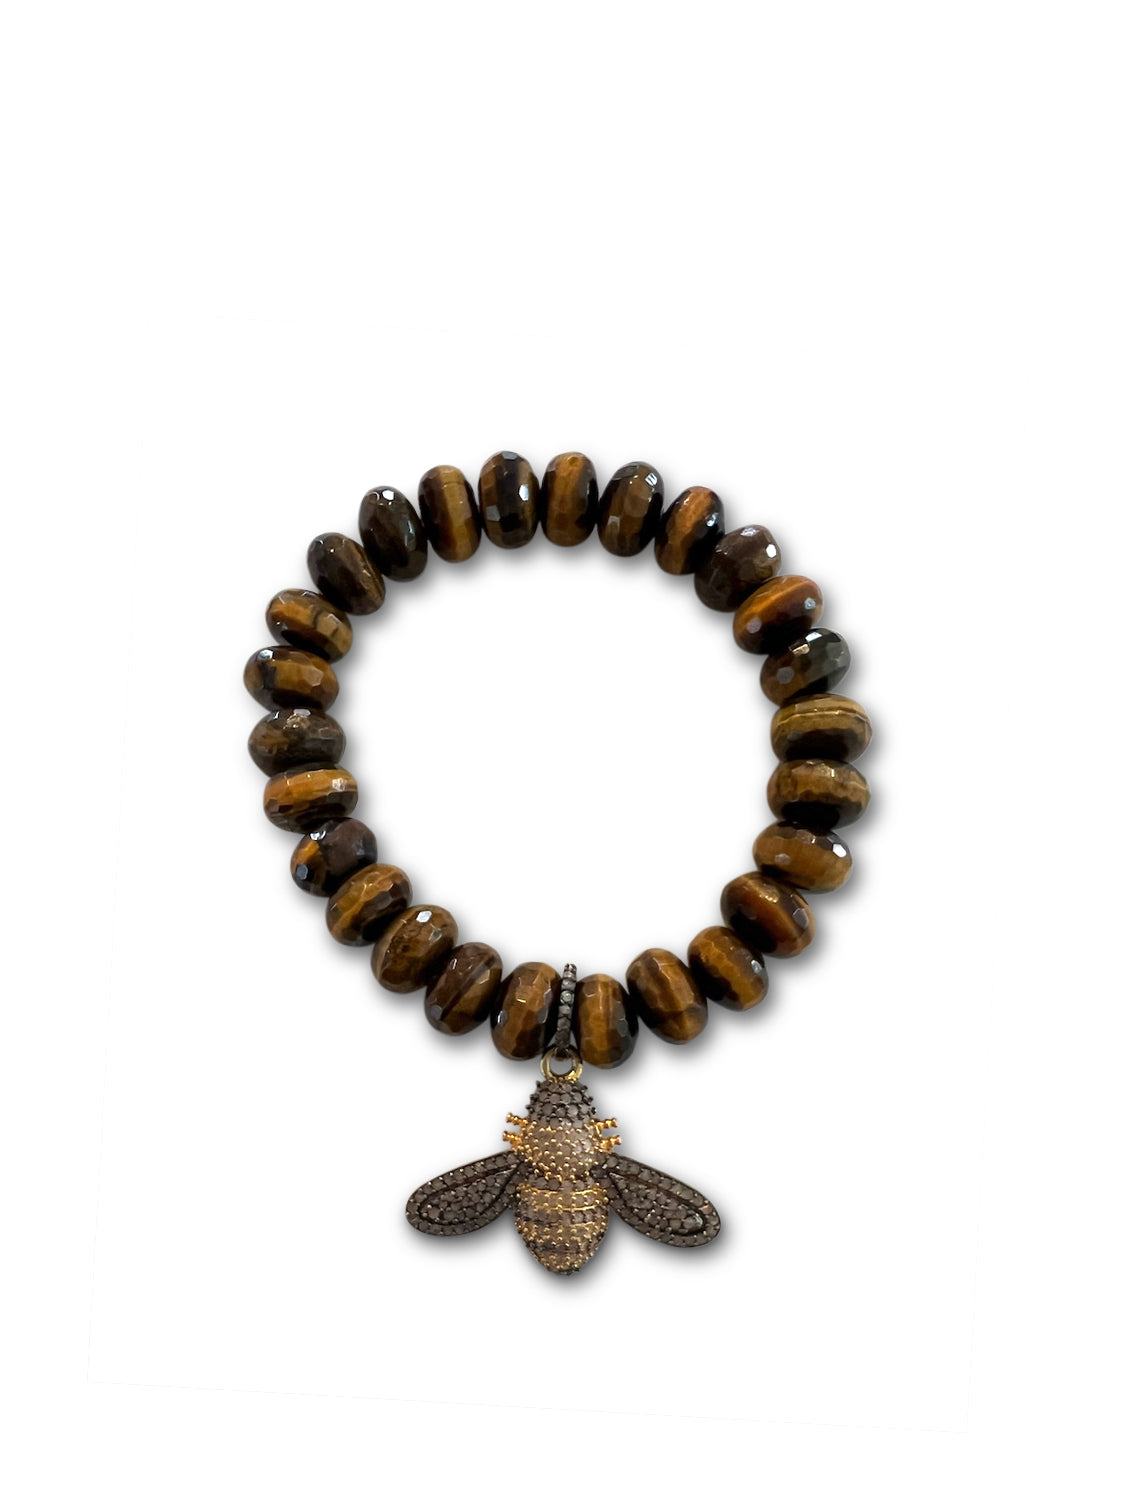 Tigers Eye Rondelles with Pave Diamond Mixed Metal Bead